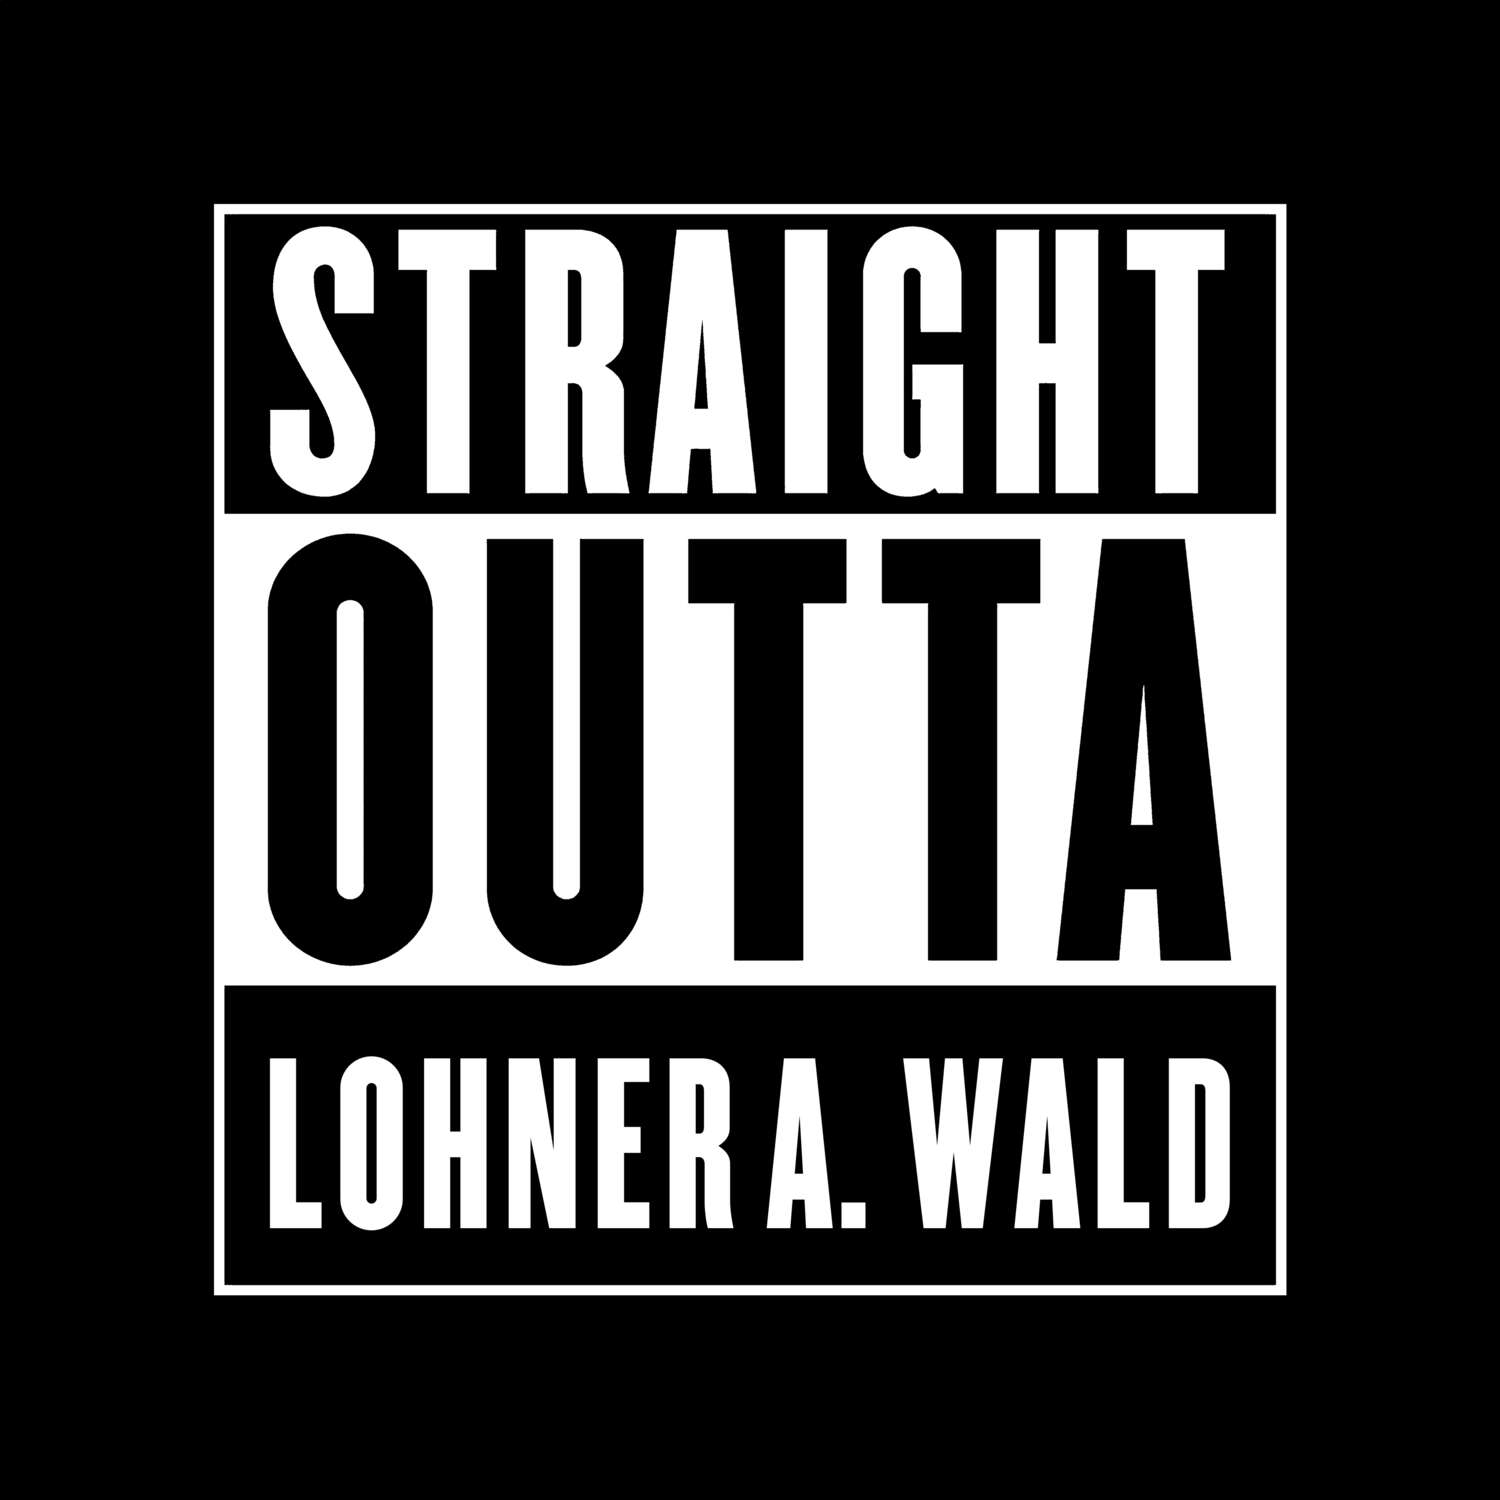 Lohner a. Wald T-Shirt »Straight Outta«